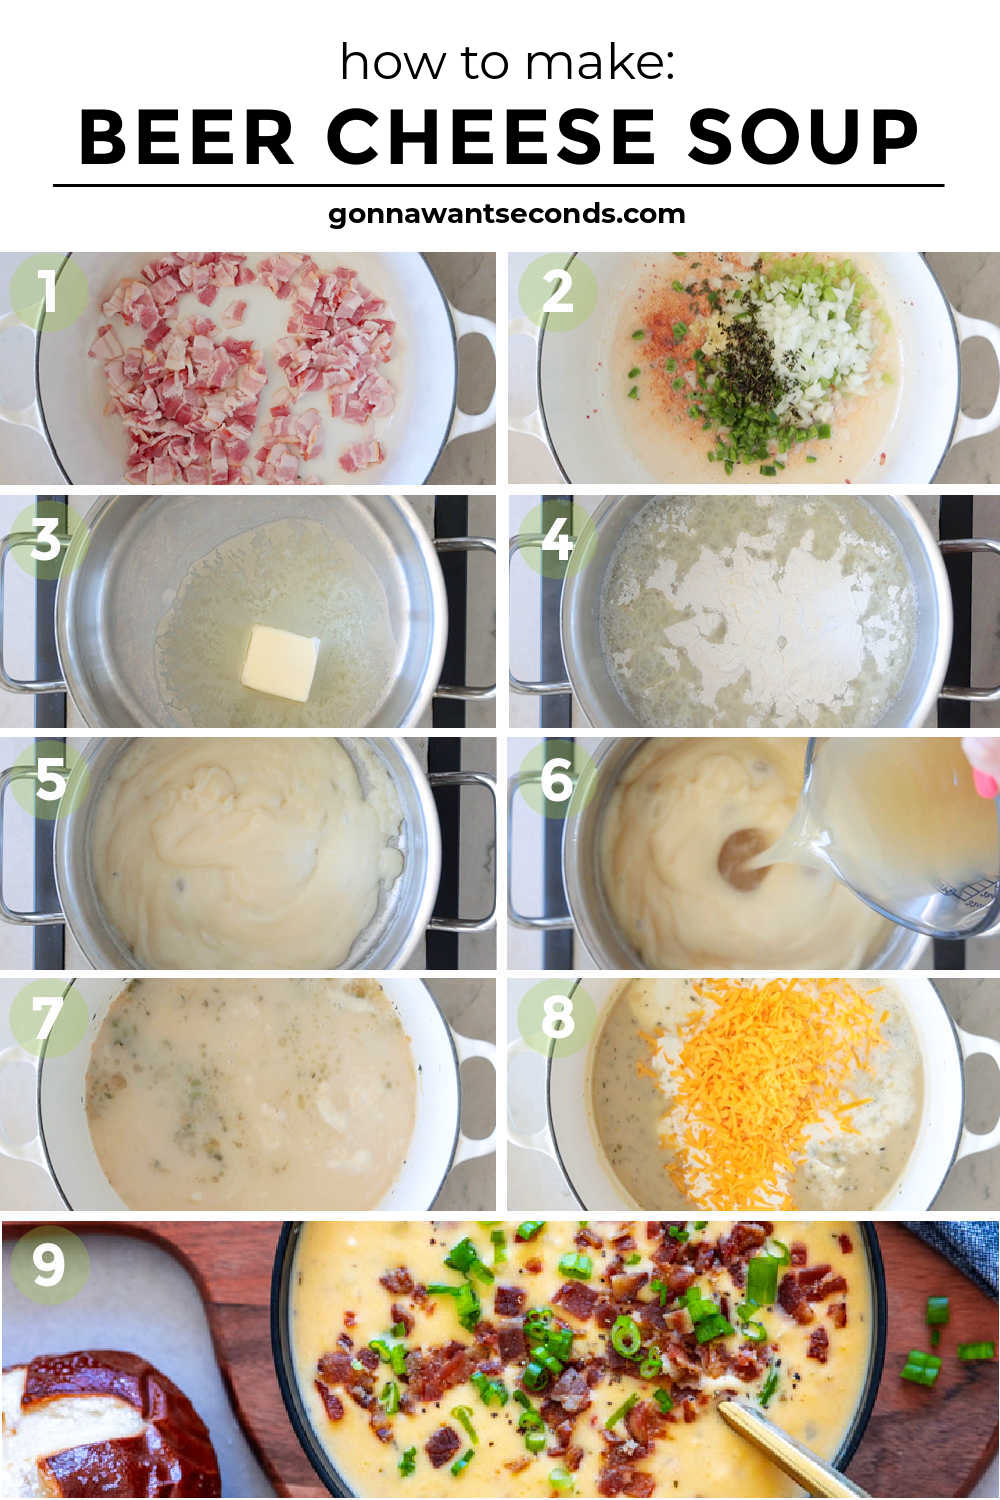 Step by step how to make beer cheese soup